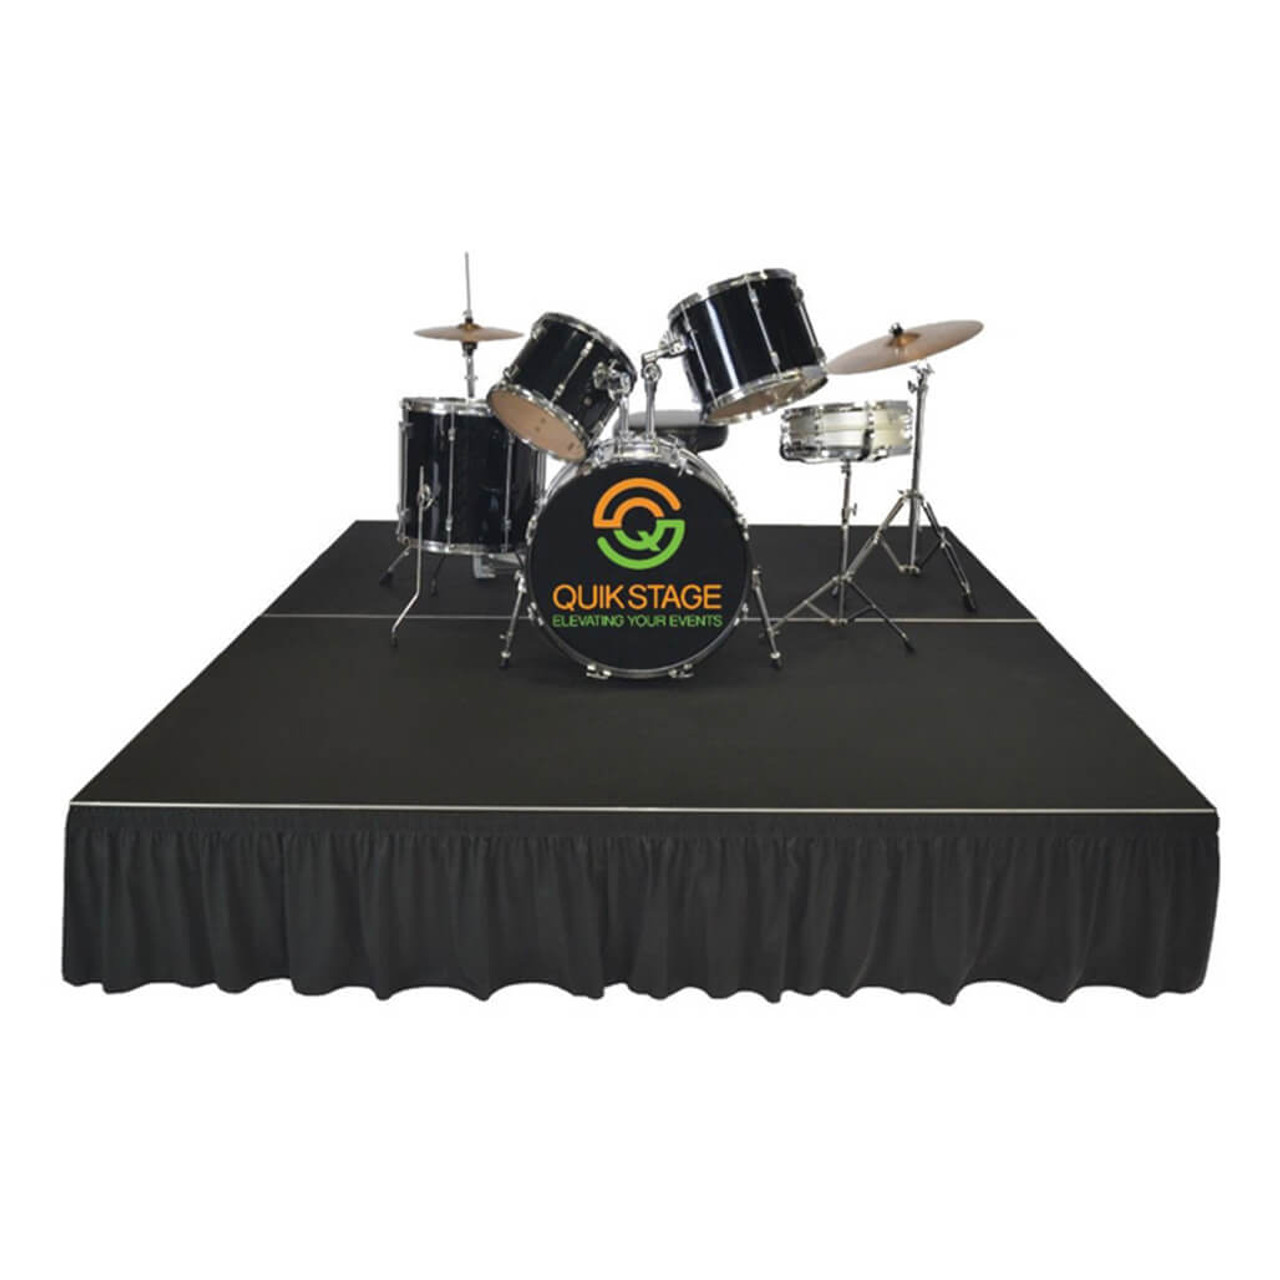 Top reviewed Quik Stage 8' x 44' High Portable Stage Package with Black Polyvinyl Non-Skid Surface. Additional Heights and Surfaces Available - Drum Riser with skirting